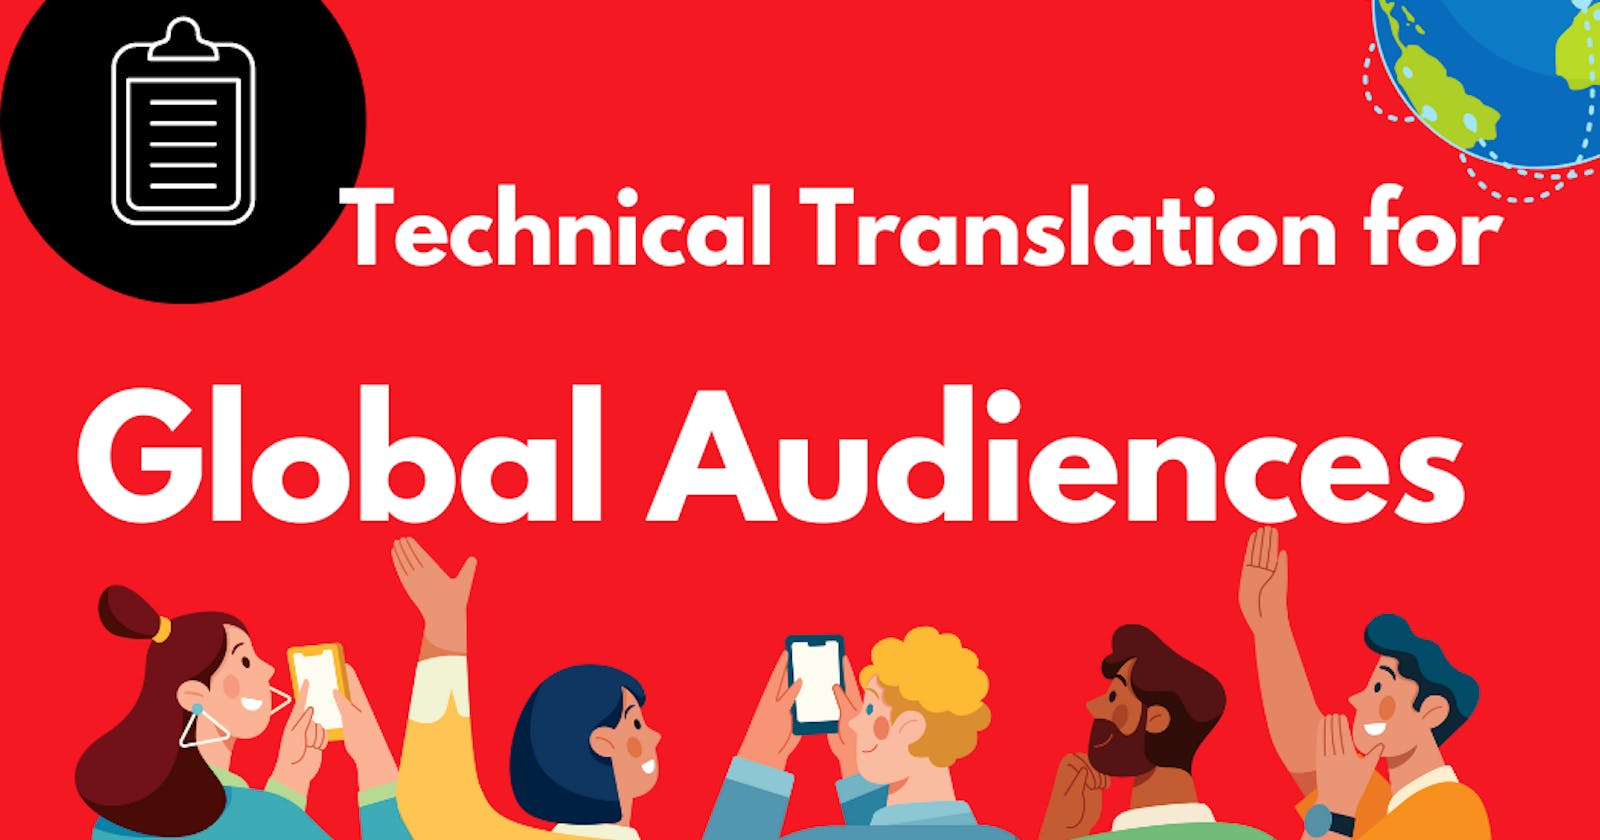 Technical Translation for Global Audiences